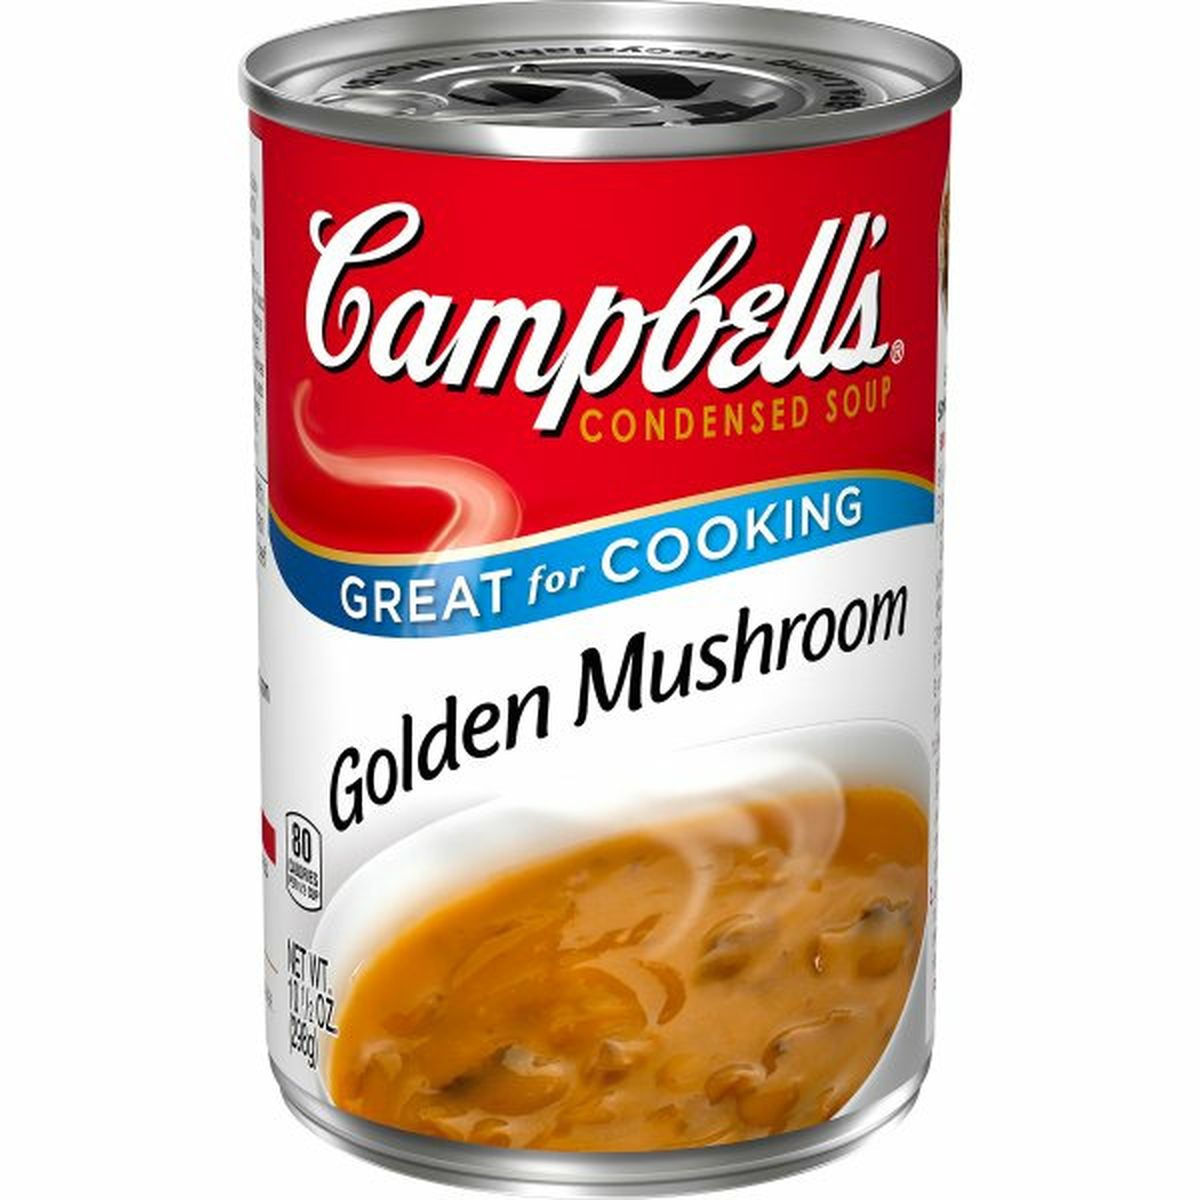 Calories in Campbell'ss Condensed Golden Mushroom Soup